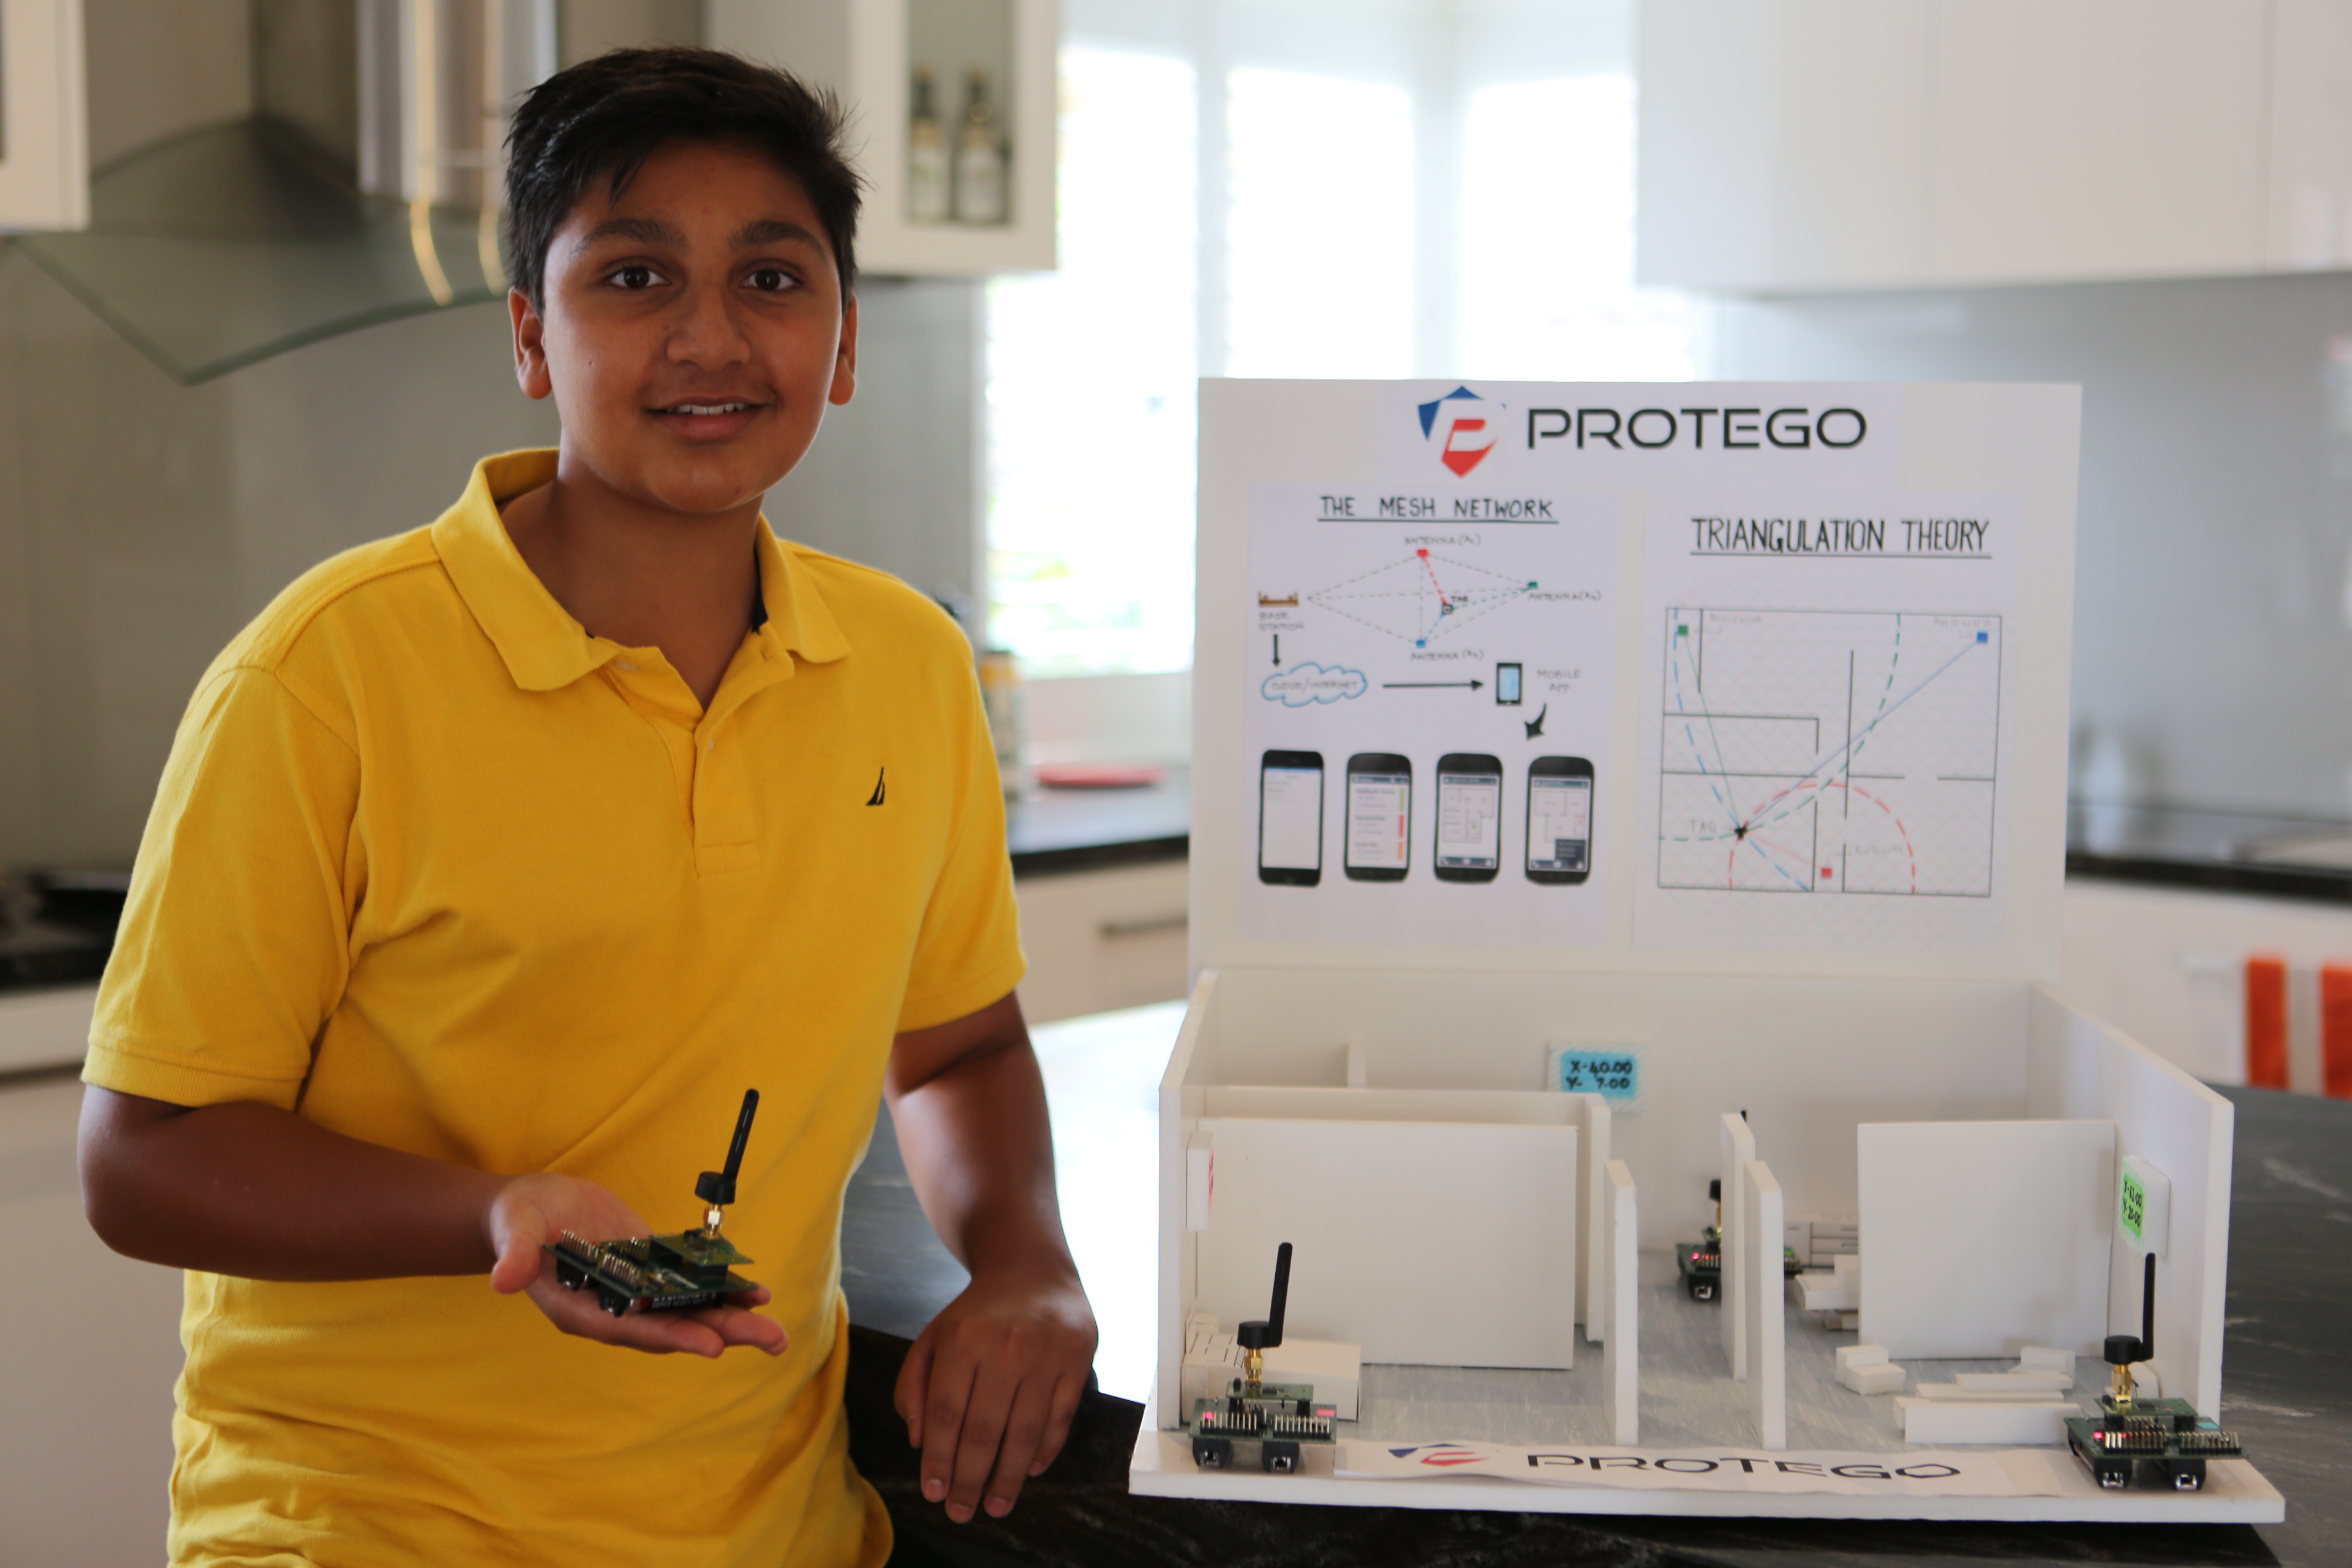 The youngest finalist Dhruv, shows off his in-home sensors, PROTEGO